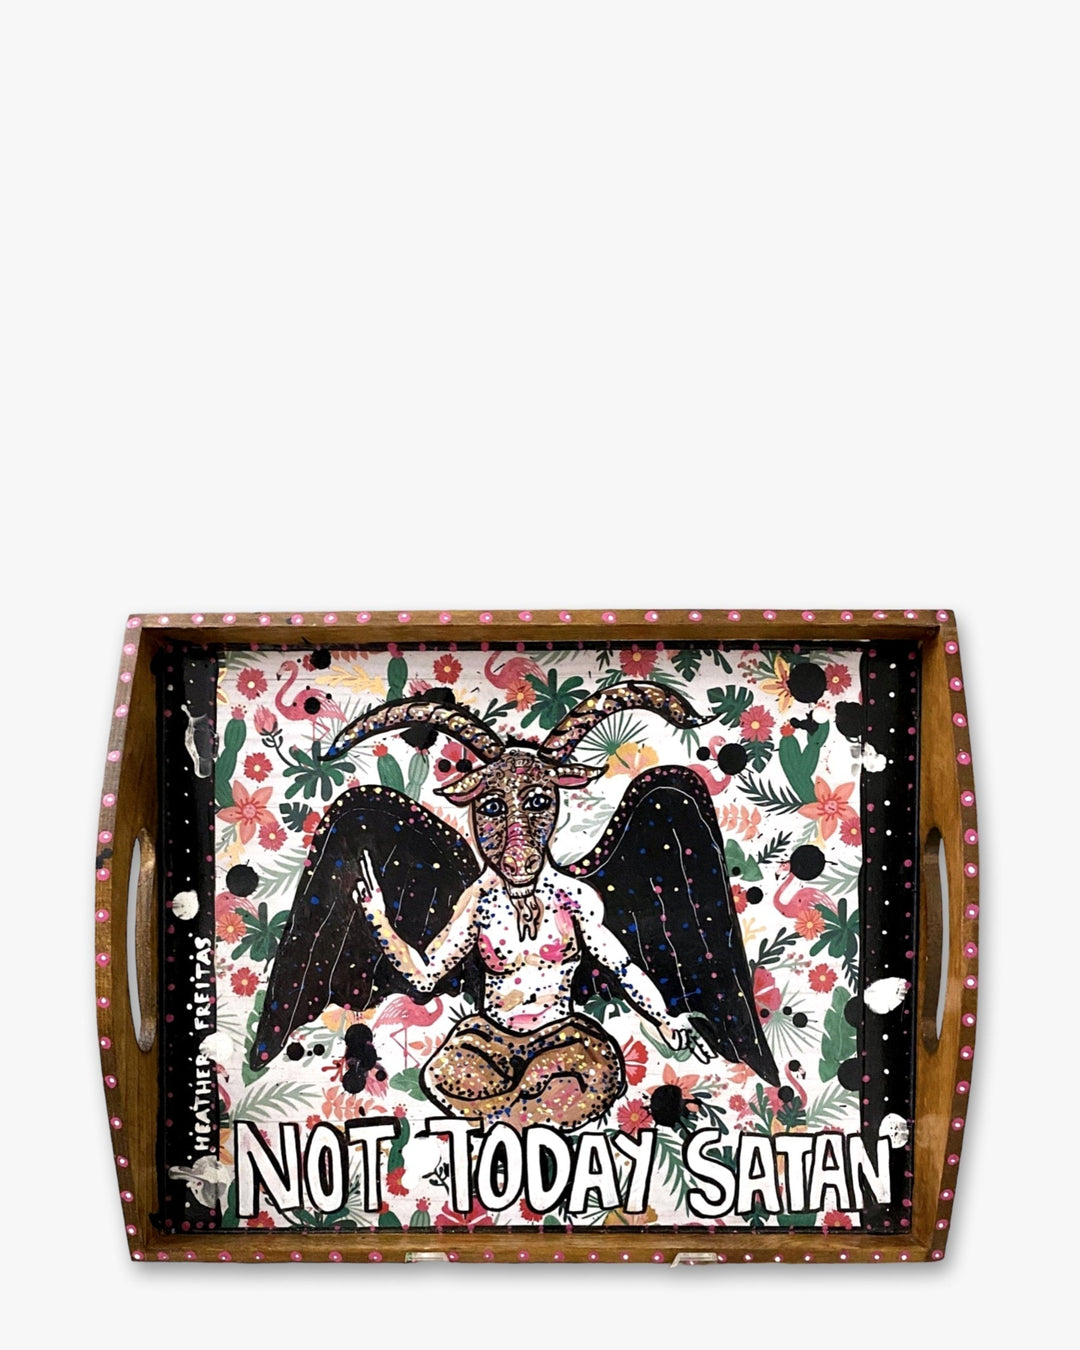 Not Today Satan - Hand painted wood serving tray - Heather Freitas 